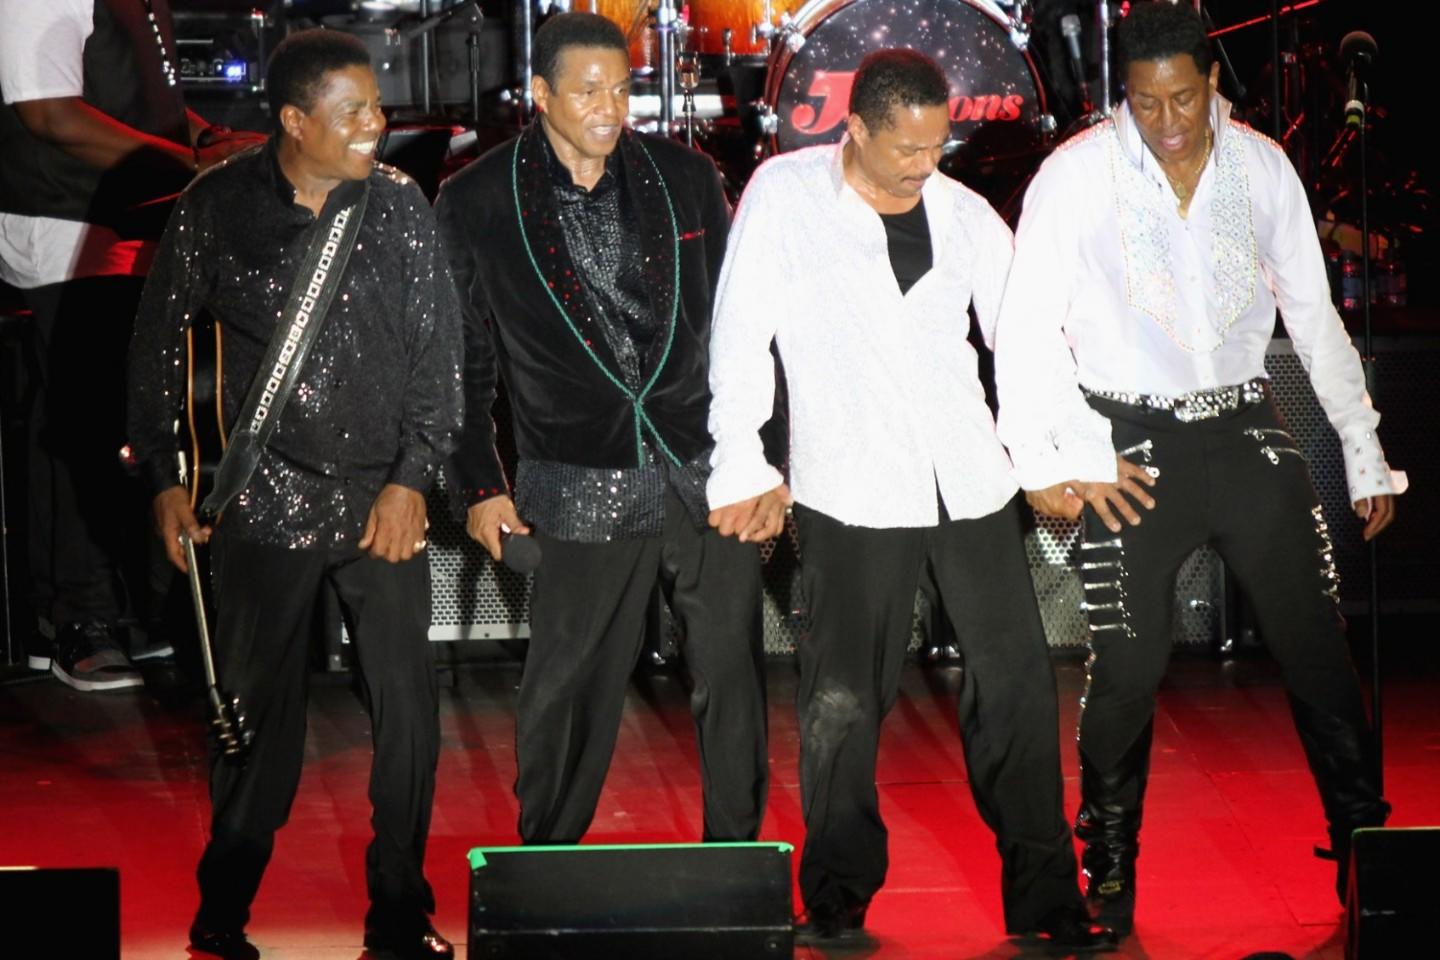 The Jacksons Tickets The Jacksons Tour 2022 and Concert Tickets viagogo